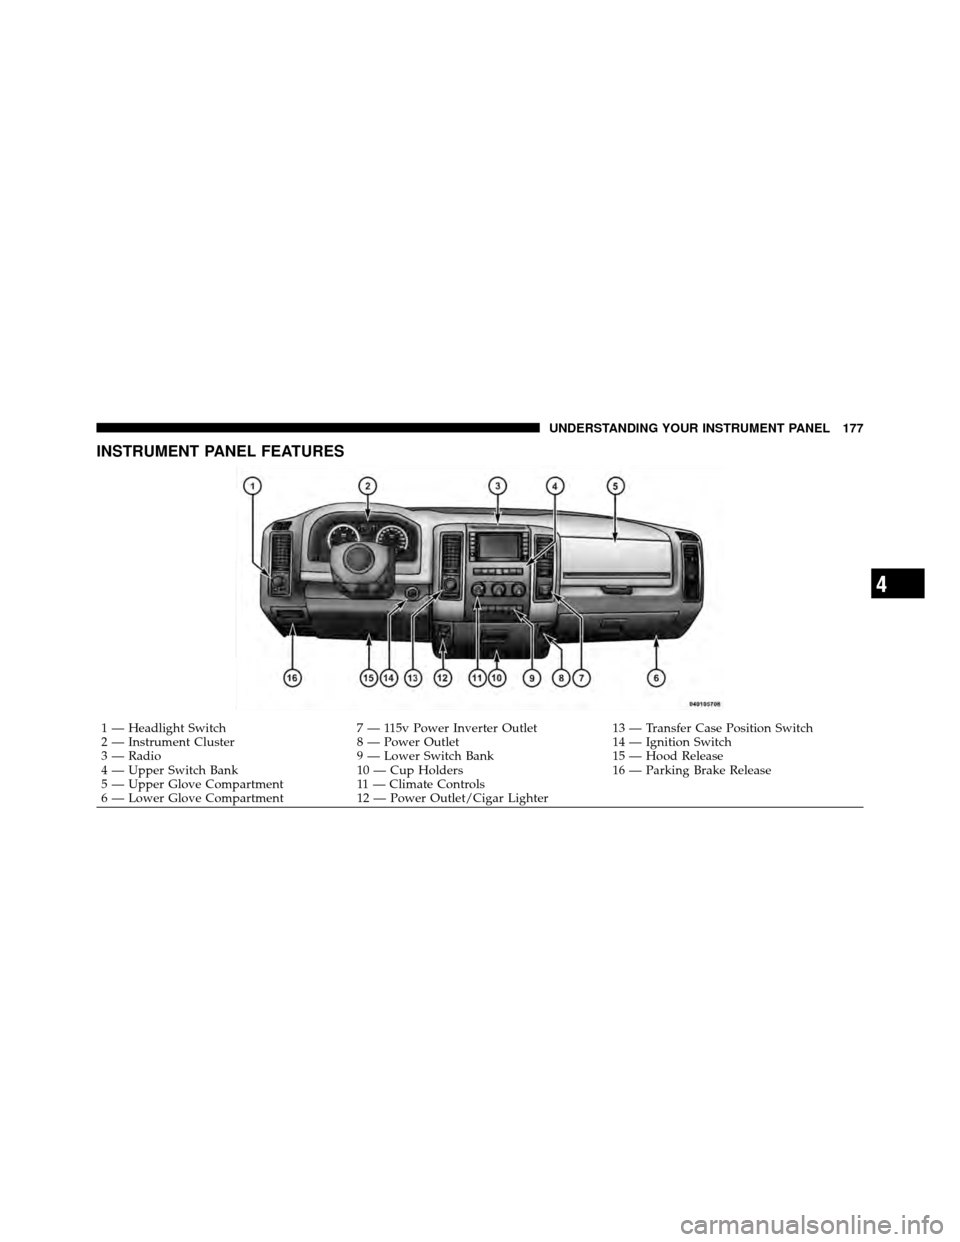 Ram 5500 Chassis Cab 2011  Owners Manual INSTRUMENT PANEL FEATURES
1 — Headlight Switch7 — 115v Power Inverter Outlet13 — Transfer Case Position Switch
2 — Instrument Cluster 8 — Power Outlet14 — Ignition Switch
3 — Radio 9 —